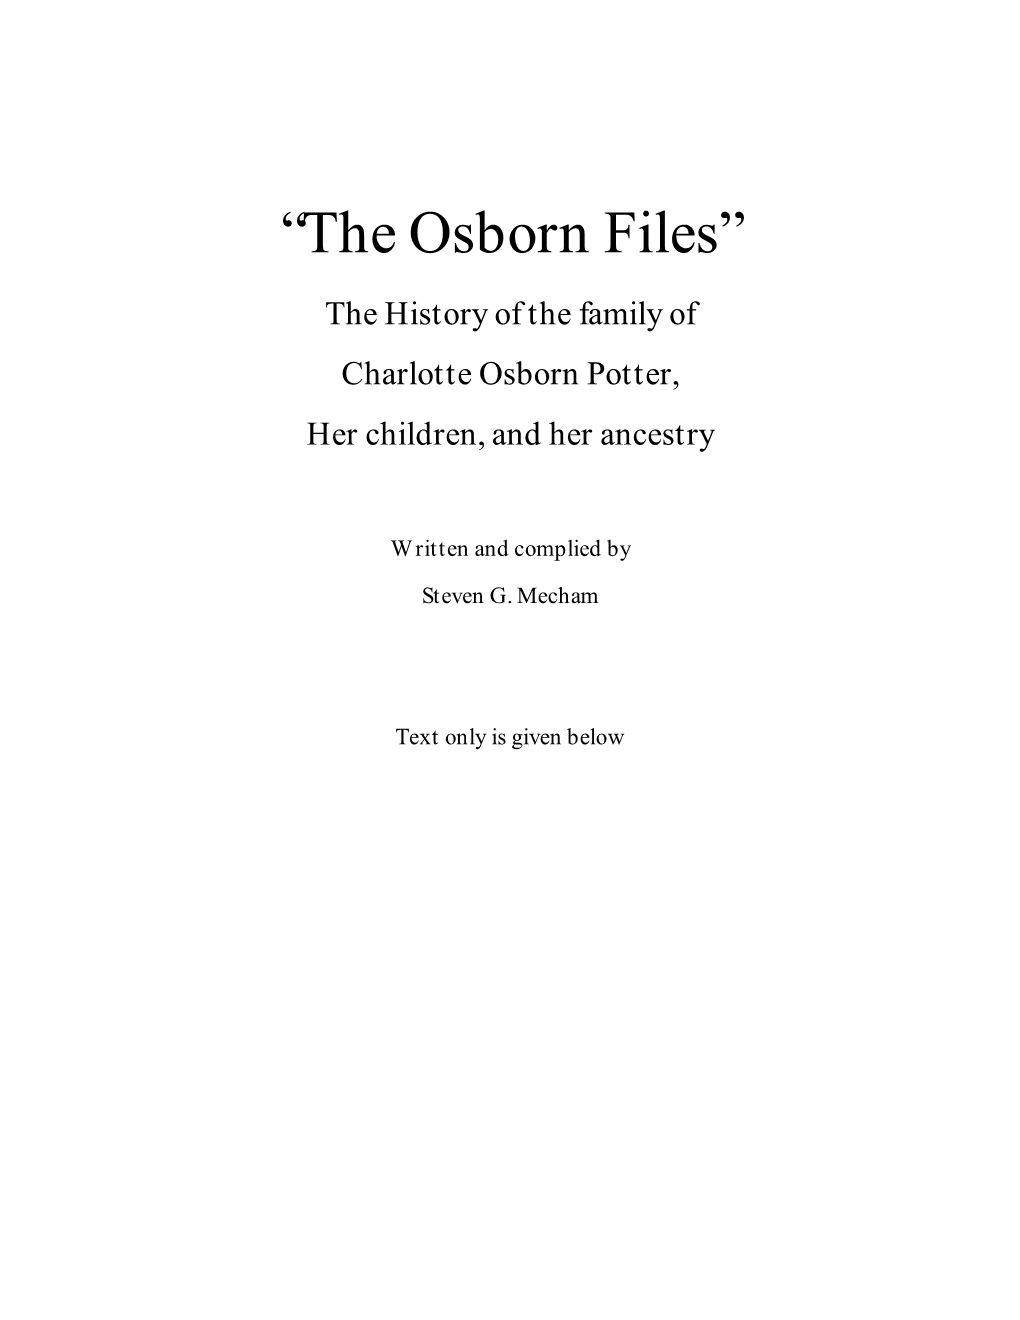 “The Osborn Files” the History of the Family of Charlotte Osborn Potter, Her Children, and Her Ancestry